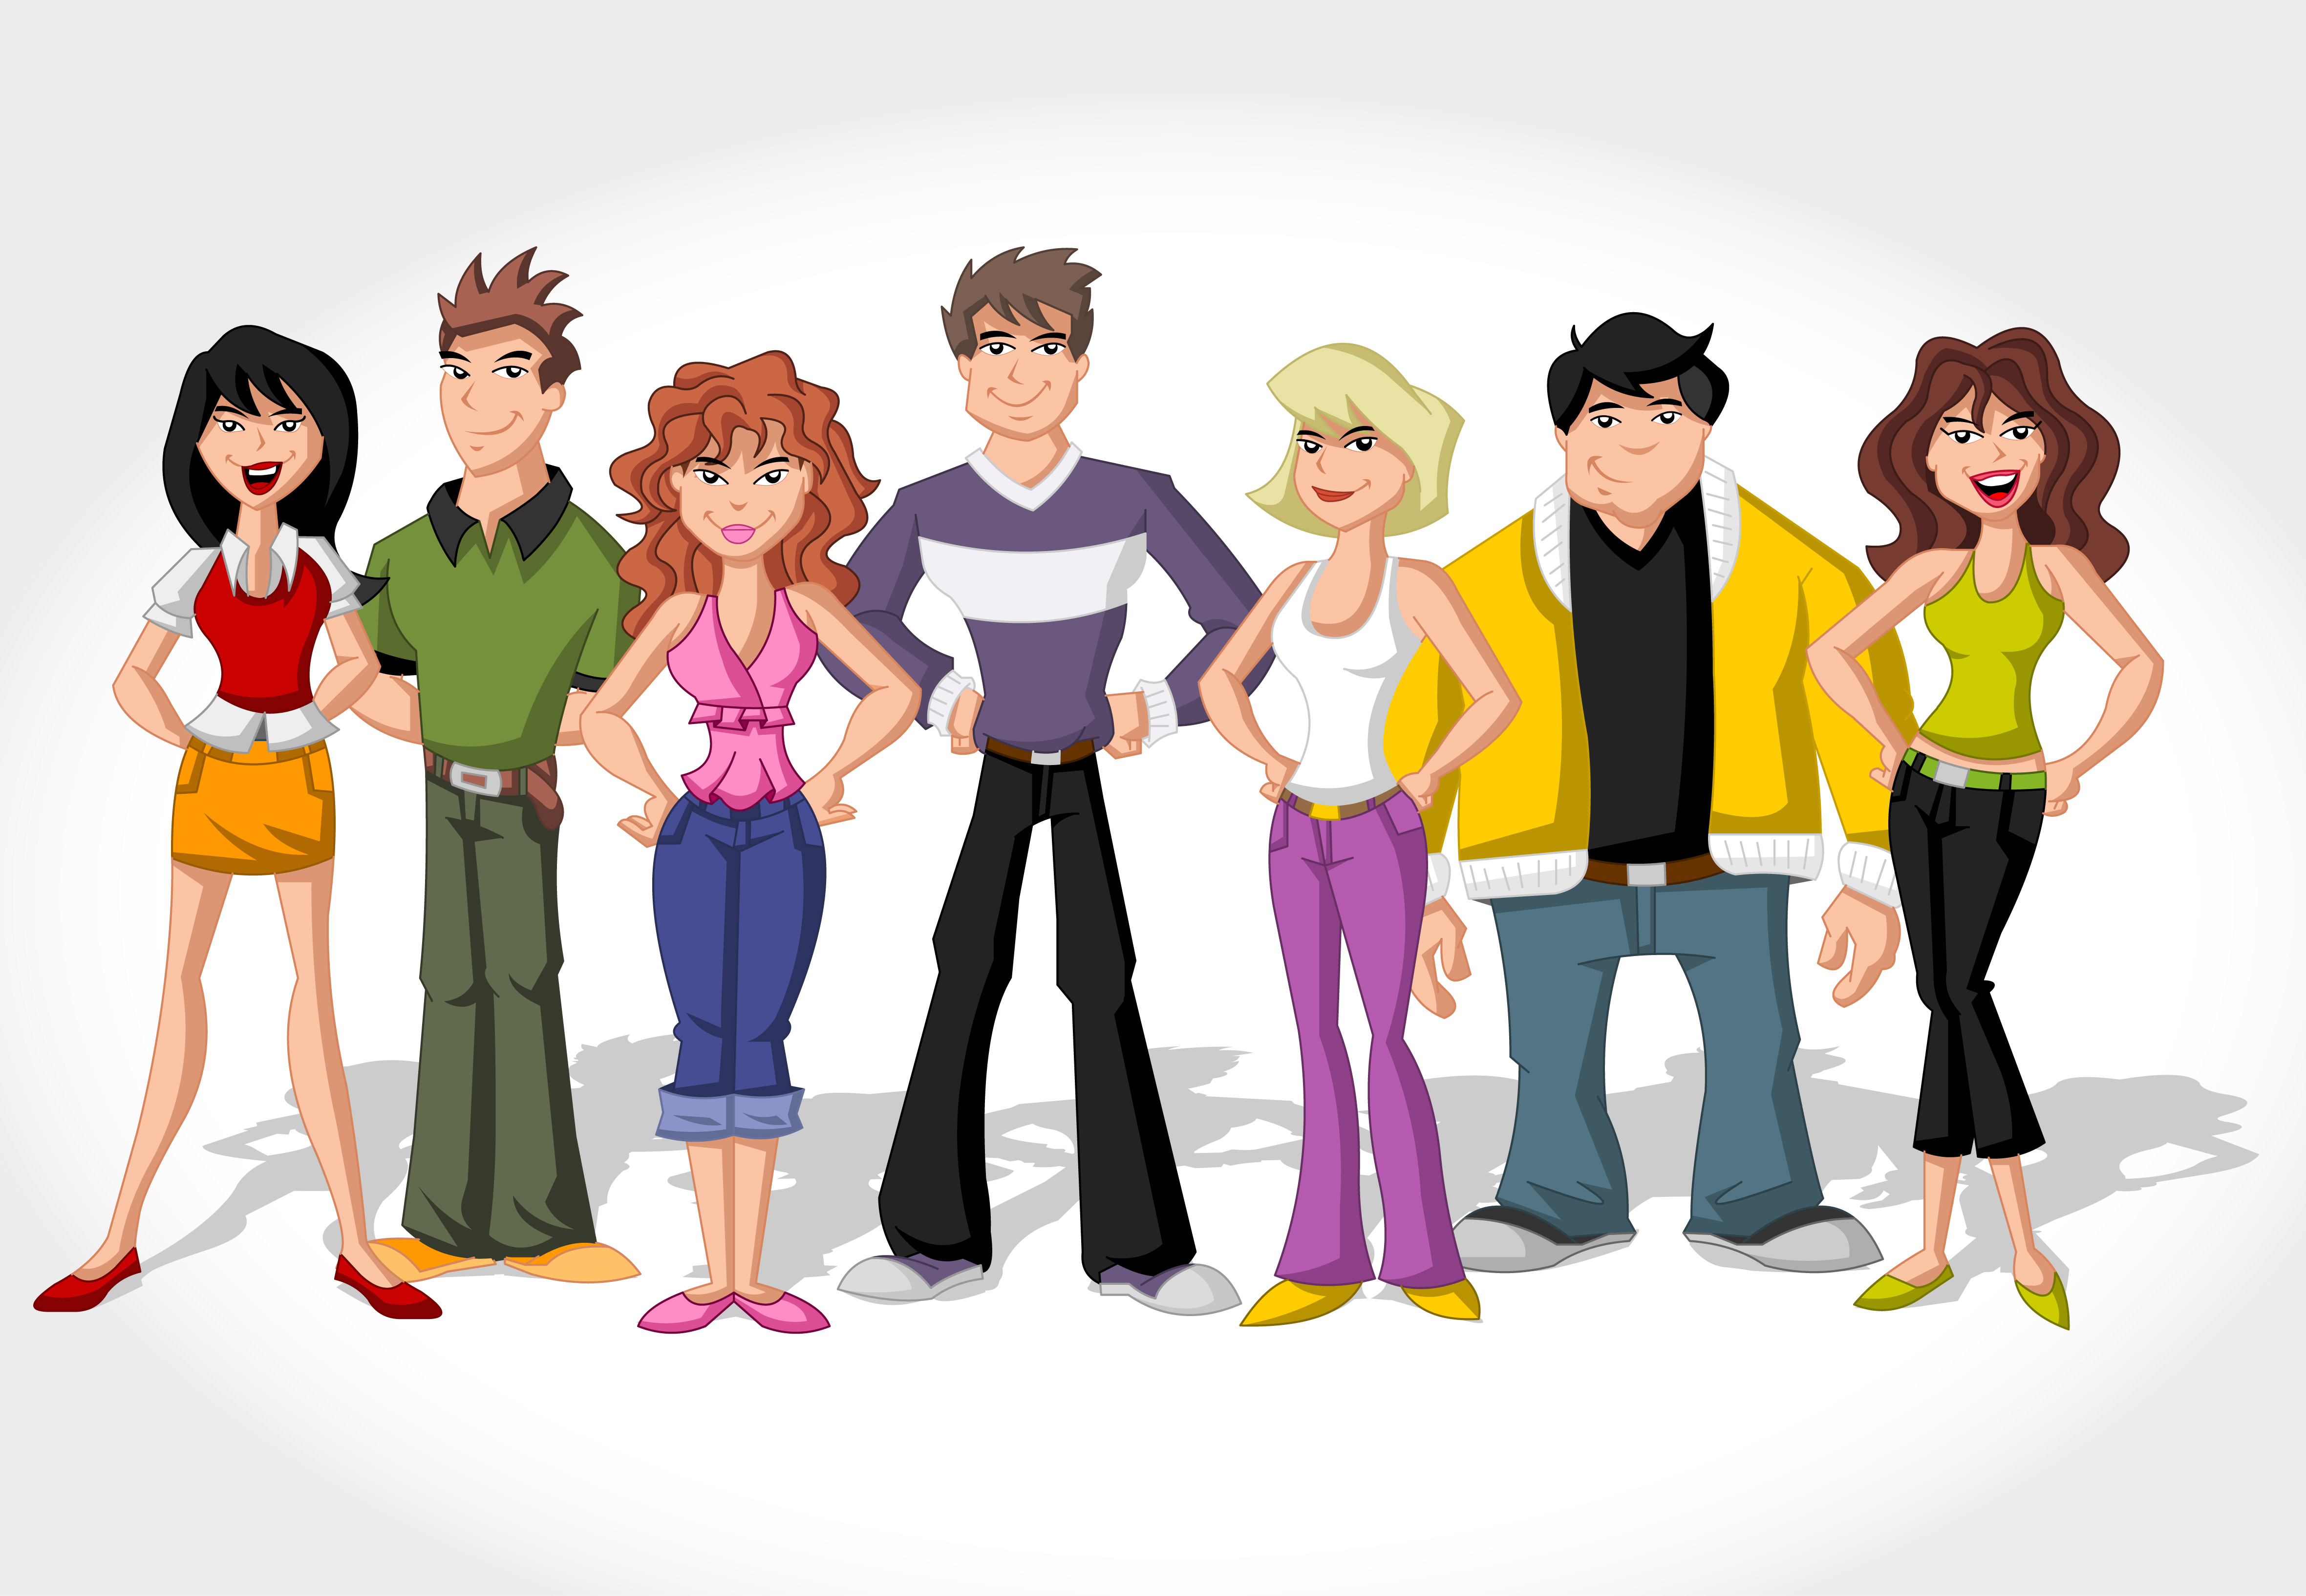 Group of people cartoon clipart - ClipartFox - ClipArt Best - ClipArt Best